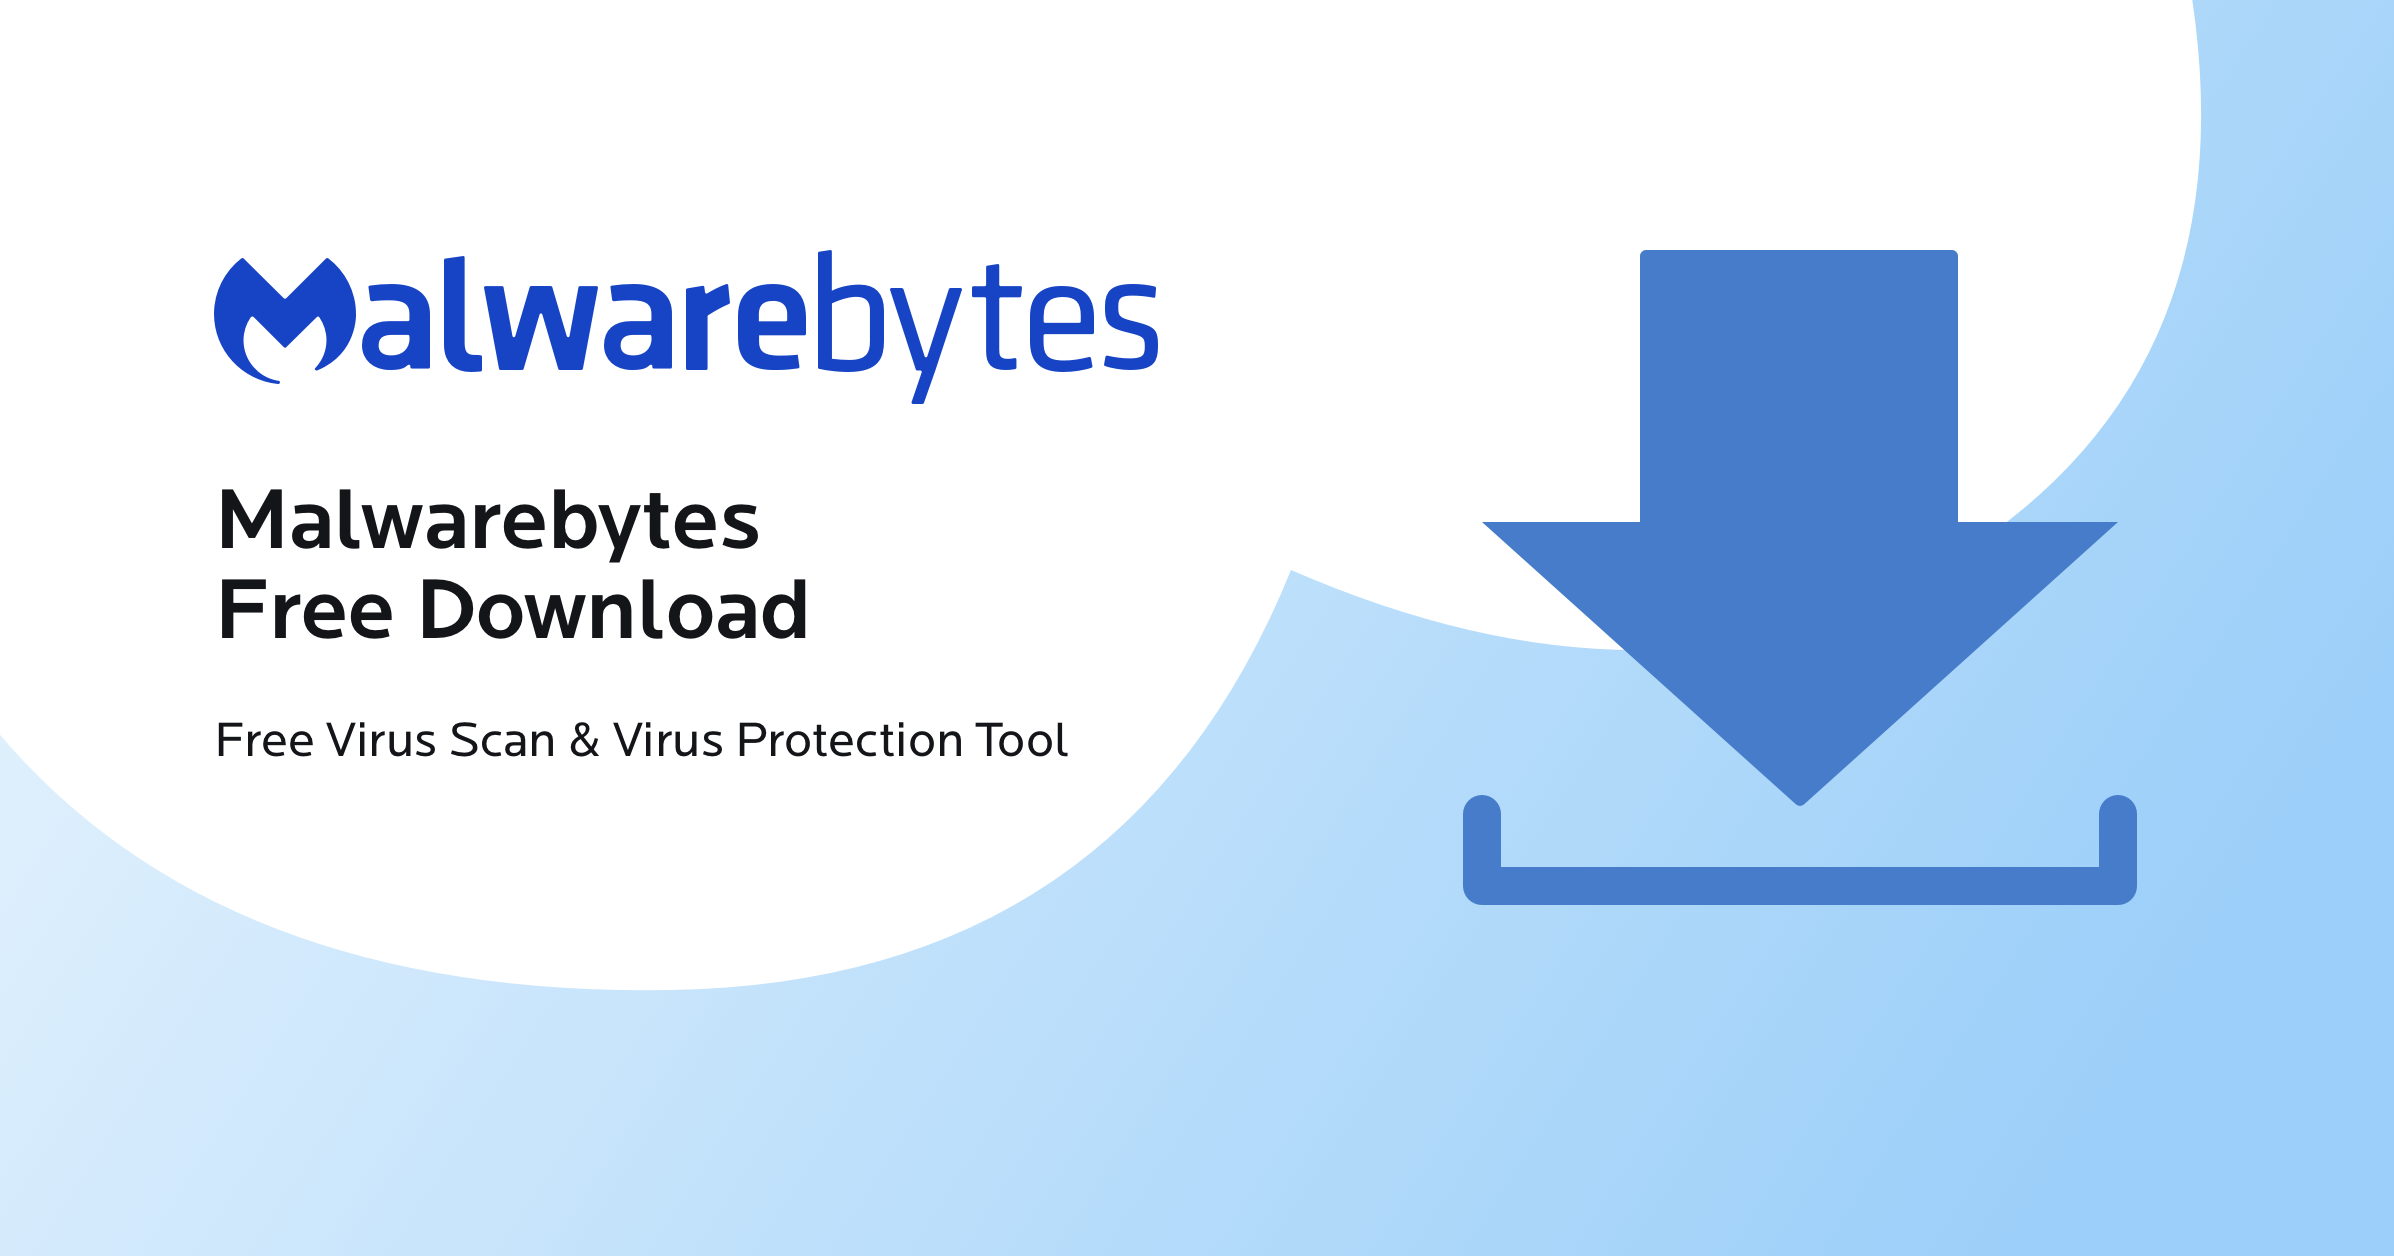 Download a reliable anti-malware software
Install and run the software